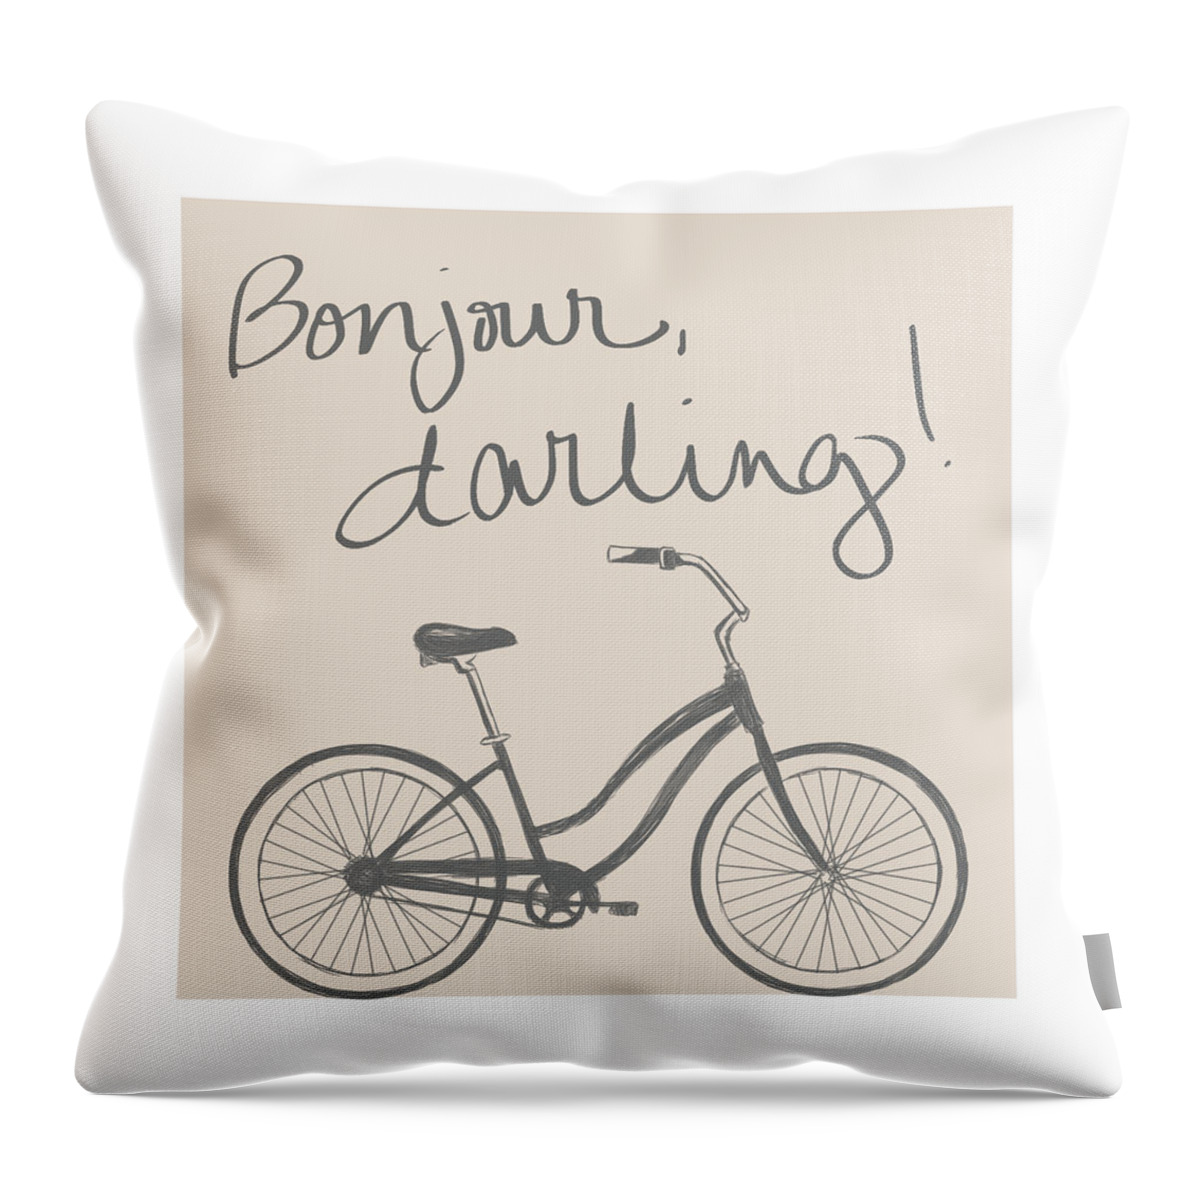 Neutral Throw Pillow featuring the mixed media Neutral Glam Bike by South Social Studio